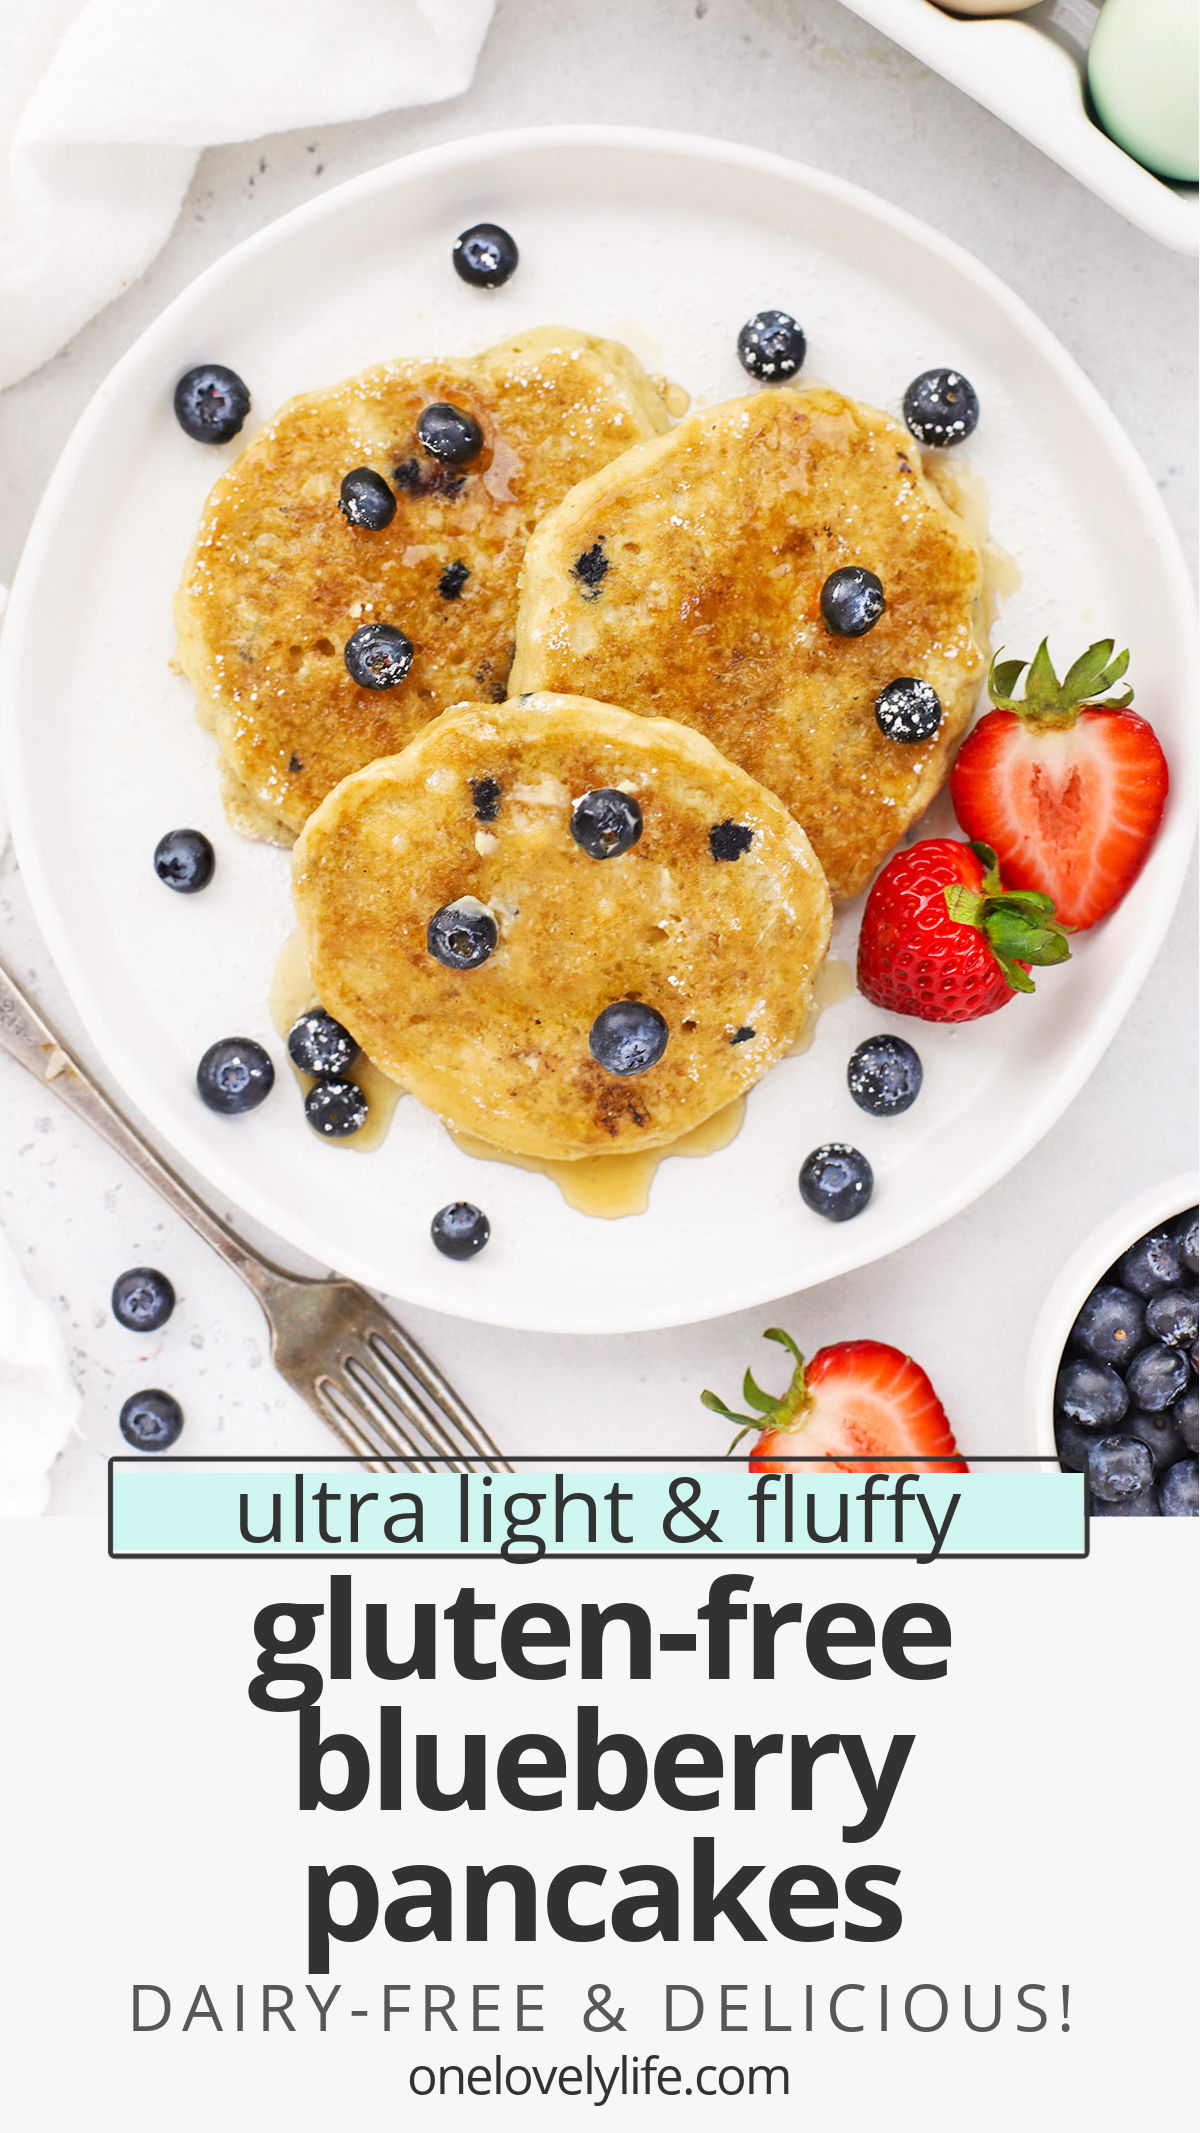 Fluffy Gluten-Free Blueberry Pancakes - These impossibly light, fluffy blueberry buttermilk pancakes are gluten-free, dairy-free & absolutely delicious. // gluten free blueberry pancakes recipe // dairy free blueberry pancakes // the best gluten-free blueberry pancakes // Gluten Free buttermilk blueberry pancakes